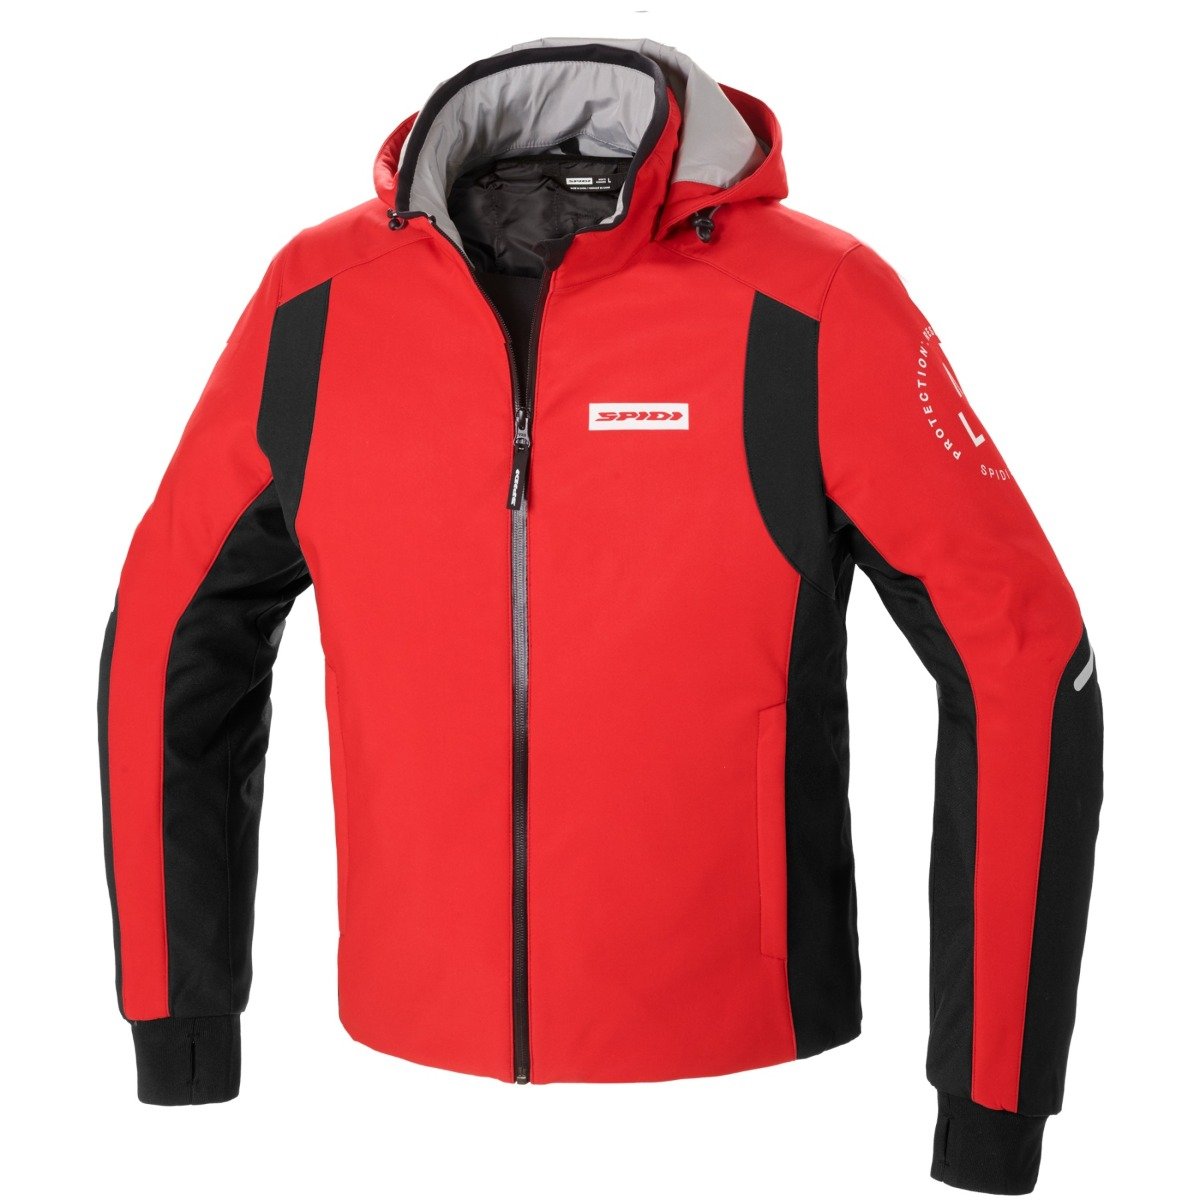 Image of Spidi Armor H2Out Jacket Red Black Size S ID 8030161442250